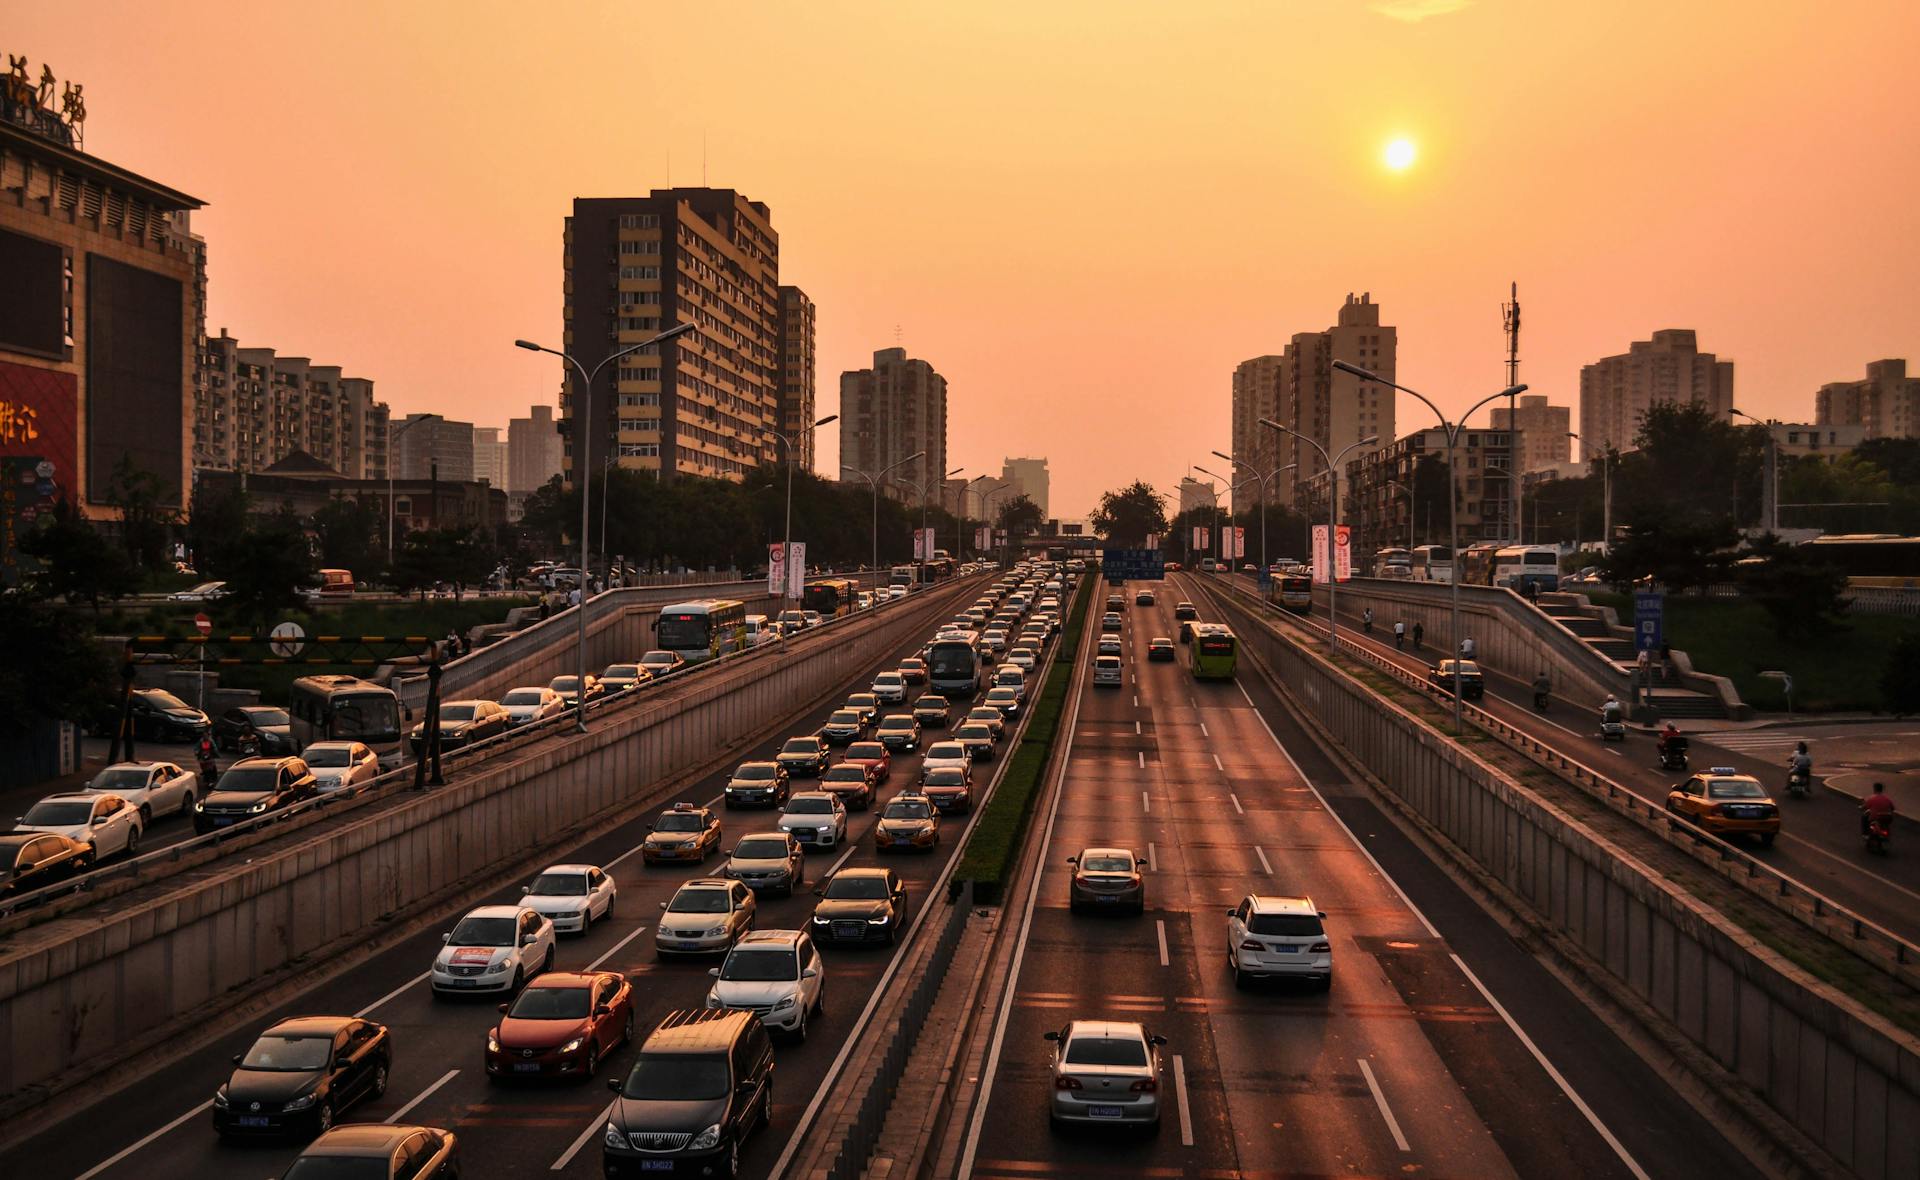 Cars on a highway | Source: Pexels